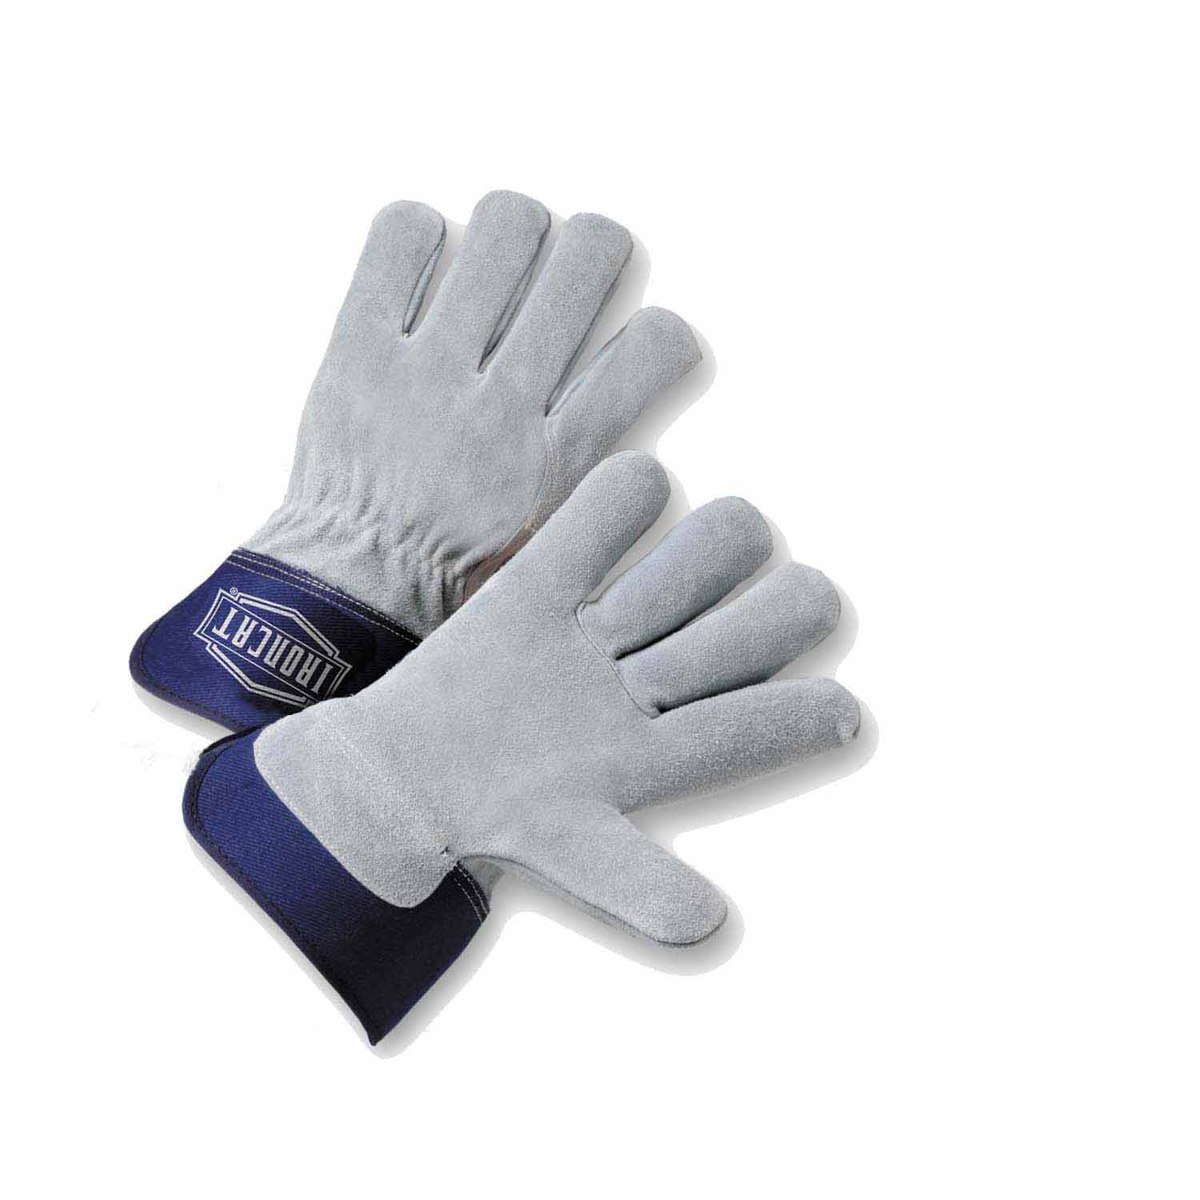 PIP® Medium Premium Split Leather Palm Gloves With Leather Back And Rubberized Safety Cuff